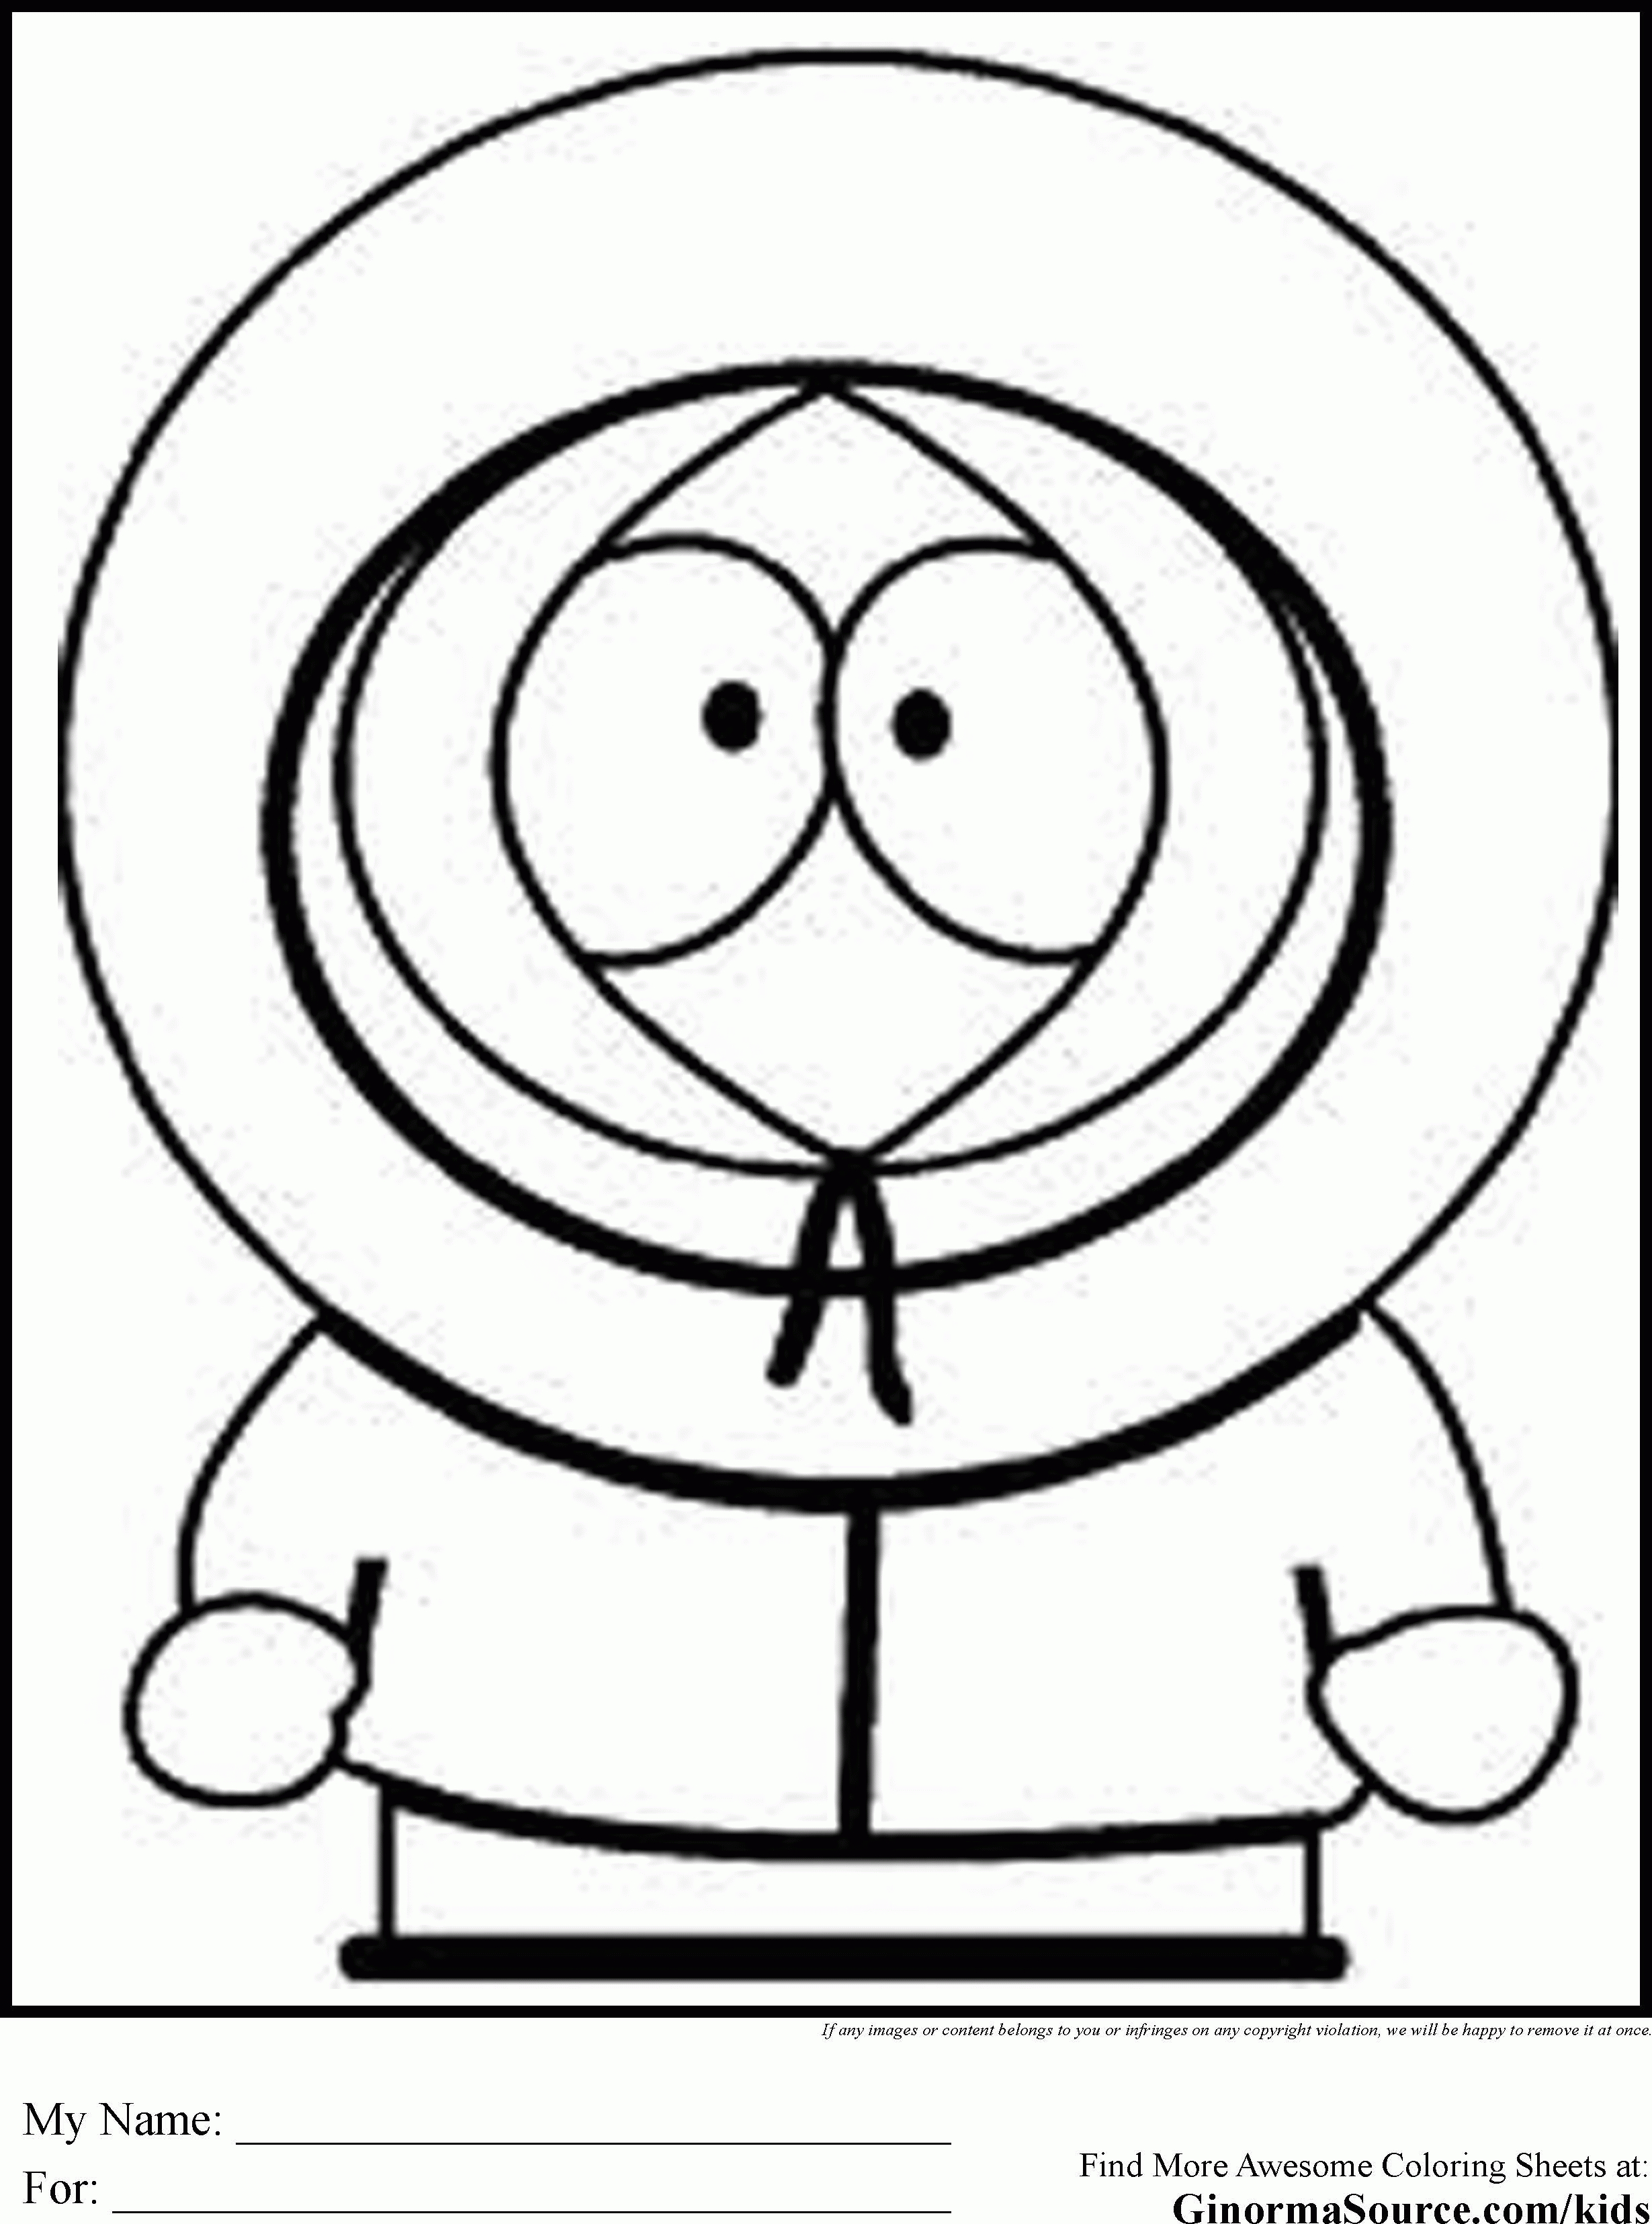 Southpark Coloring Pages For Teens | Coloring Pages | Dinosaur - Free Printable South Park Coloring Pages